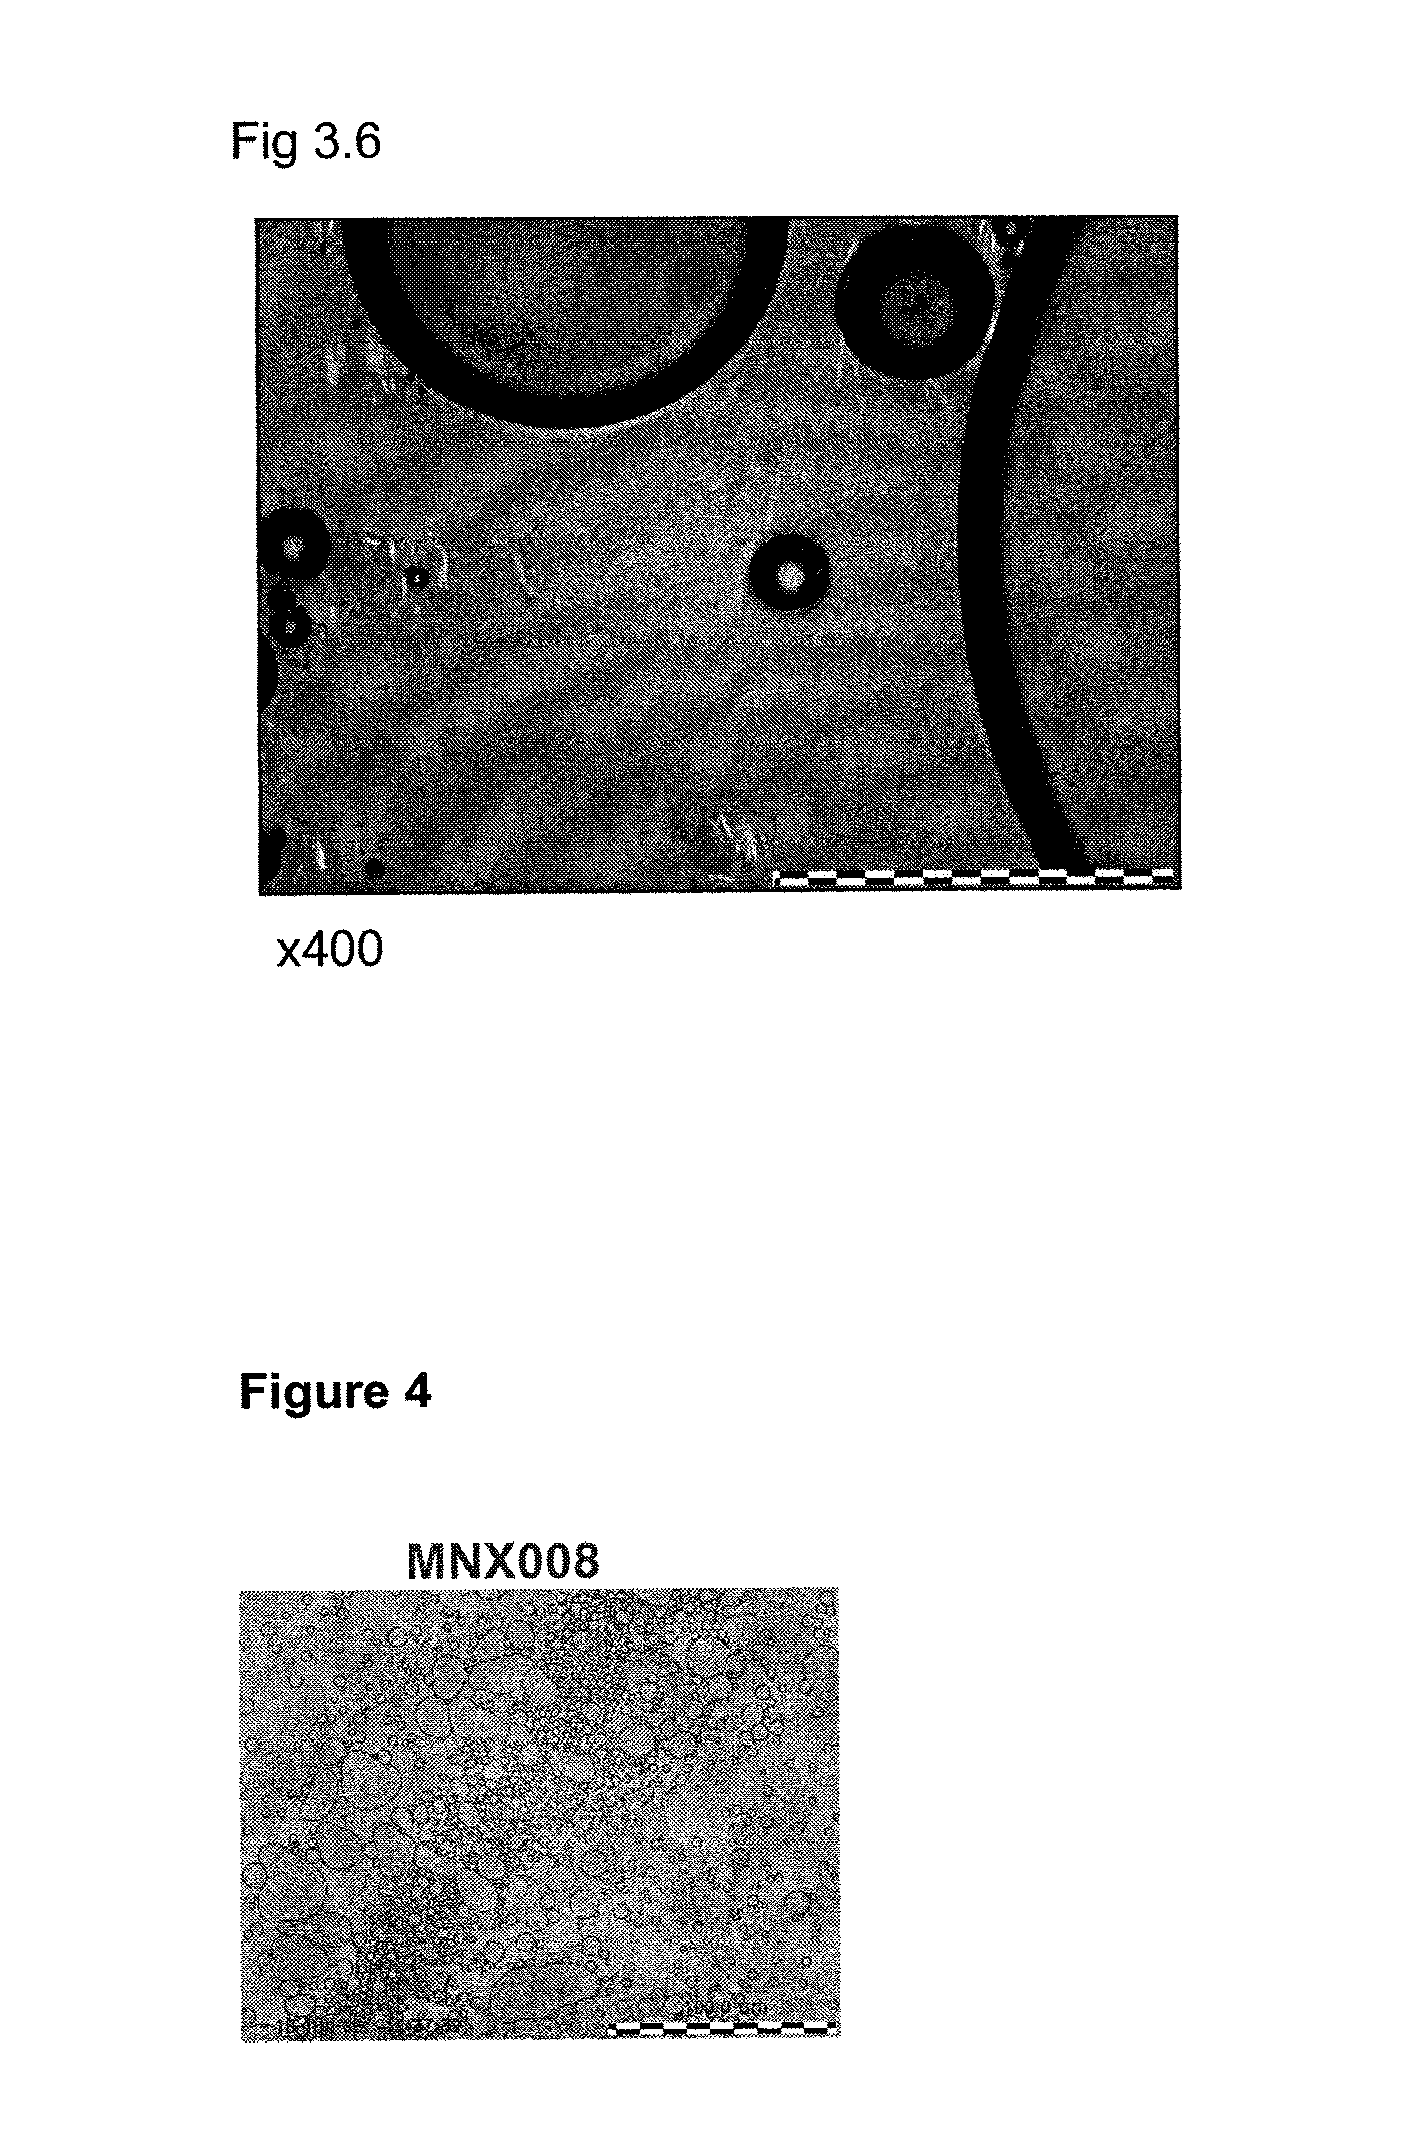 Foamable Compositions and Kits Comprising One or More of a Channel Agent, a Cholinergic Agent, A nitric Oxide Donor and Related Agents and Their Uses